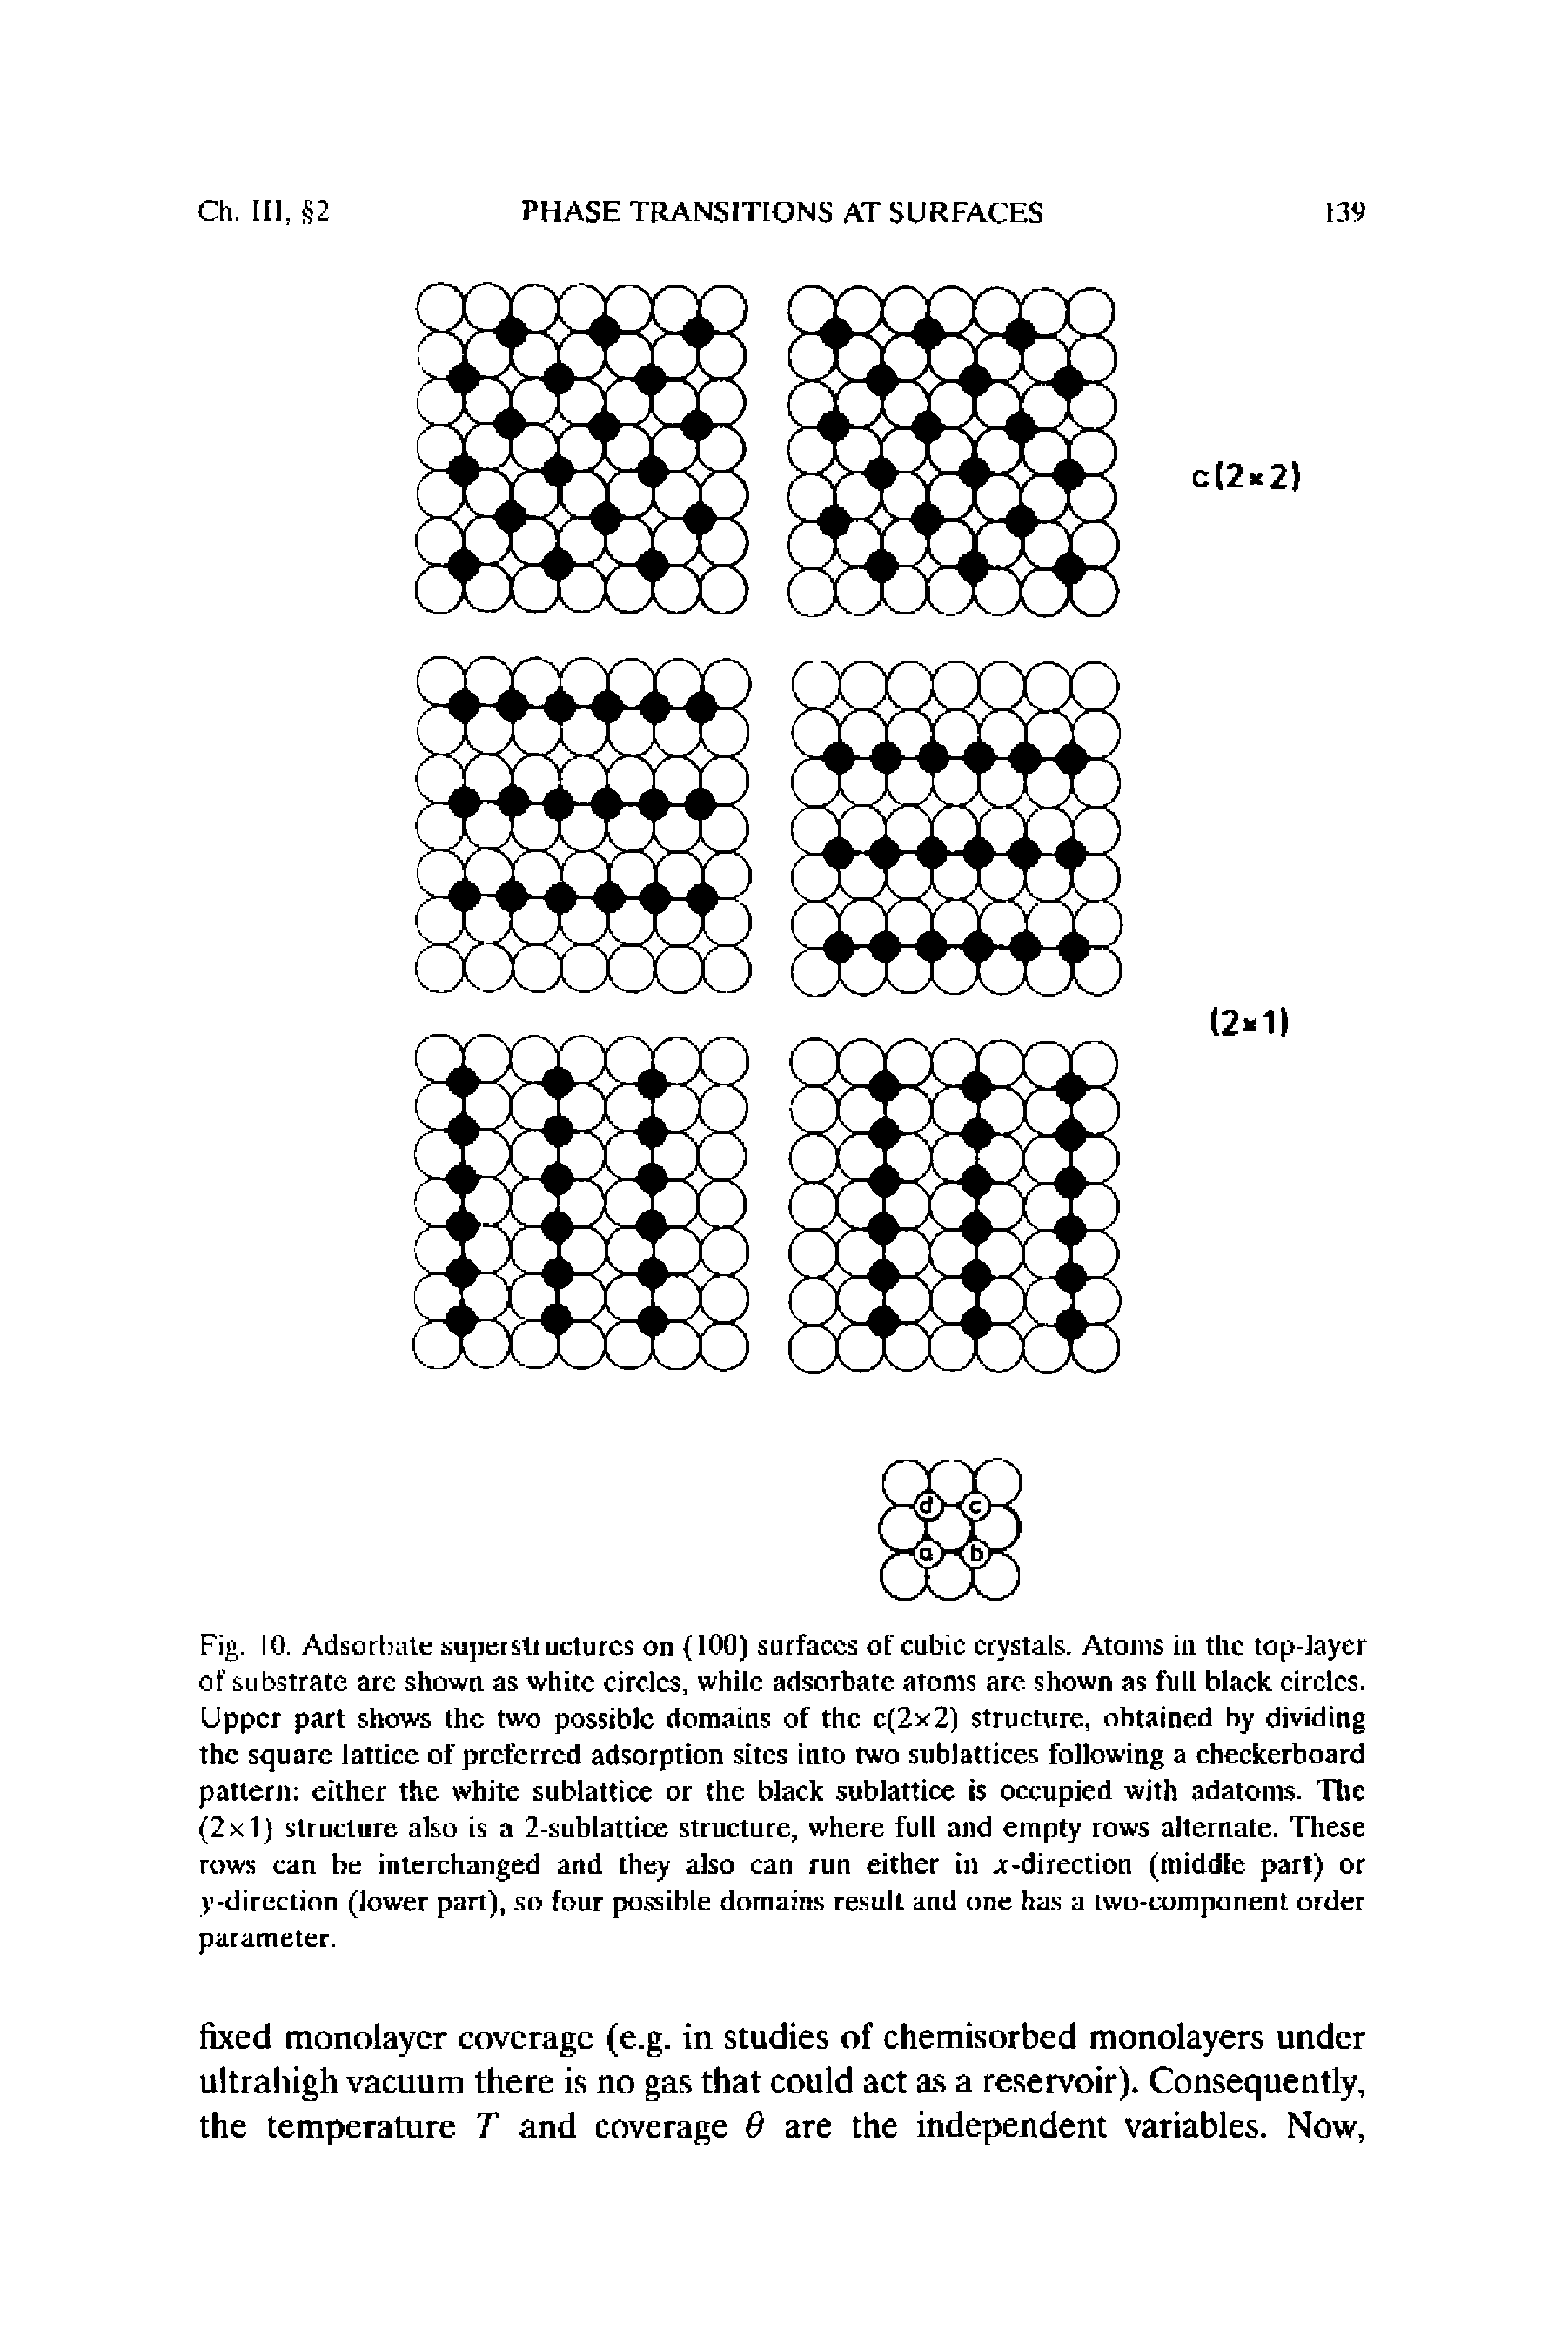 Fig. 10. Adsorbate superstructures on 100) surfaces of cubic crystals. Atoms in the top-layer of substrate are shown as white circles, while adsorbate atoms are shown as full black circles. Upper part shows the two possible domains of the c(2x2) structure, ohtained by dividing the square lattice of preferred adsorption sites into two sublattices following a checkerboard pattern either the white sublattice or the black sublattice is occupied with adatoms. The (2x1) structure also is a 2-sublattice structure, where full and empty rows alternate. These rows can be interchanged and they also can run either in -t-direction (middle part) or y-direction (lower part), so four passible domains result and one has a two-component order parameter.